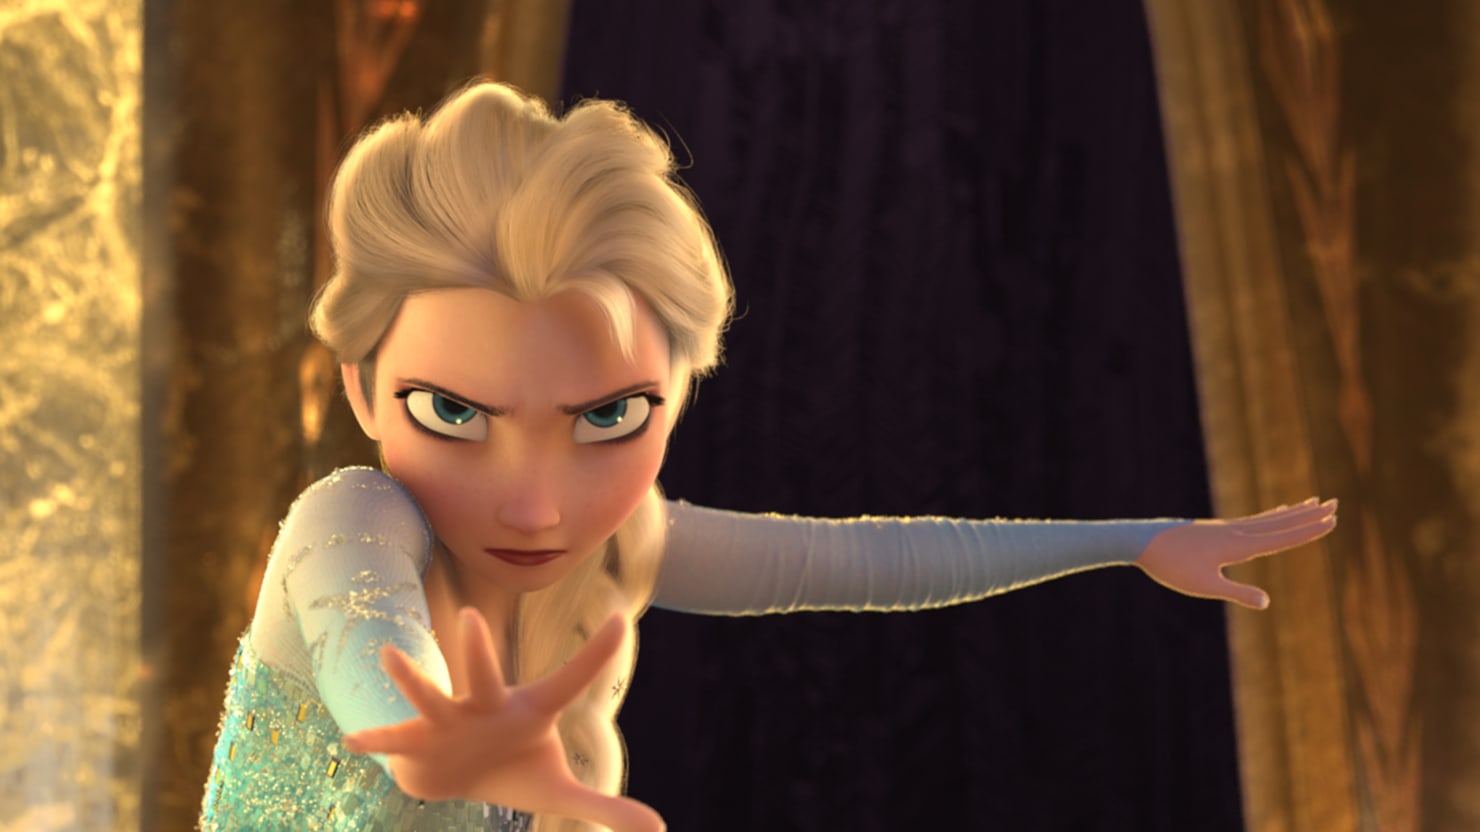 Disney's Sublimely 'Frozen' Isn't Your Typical Princess Movie